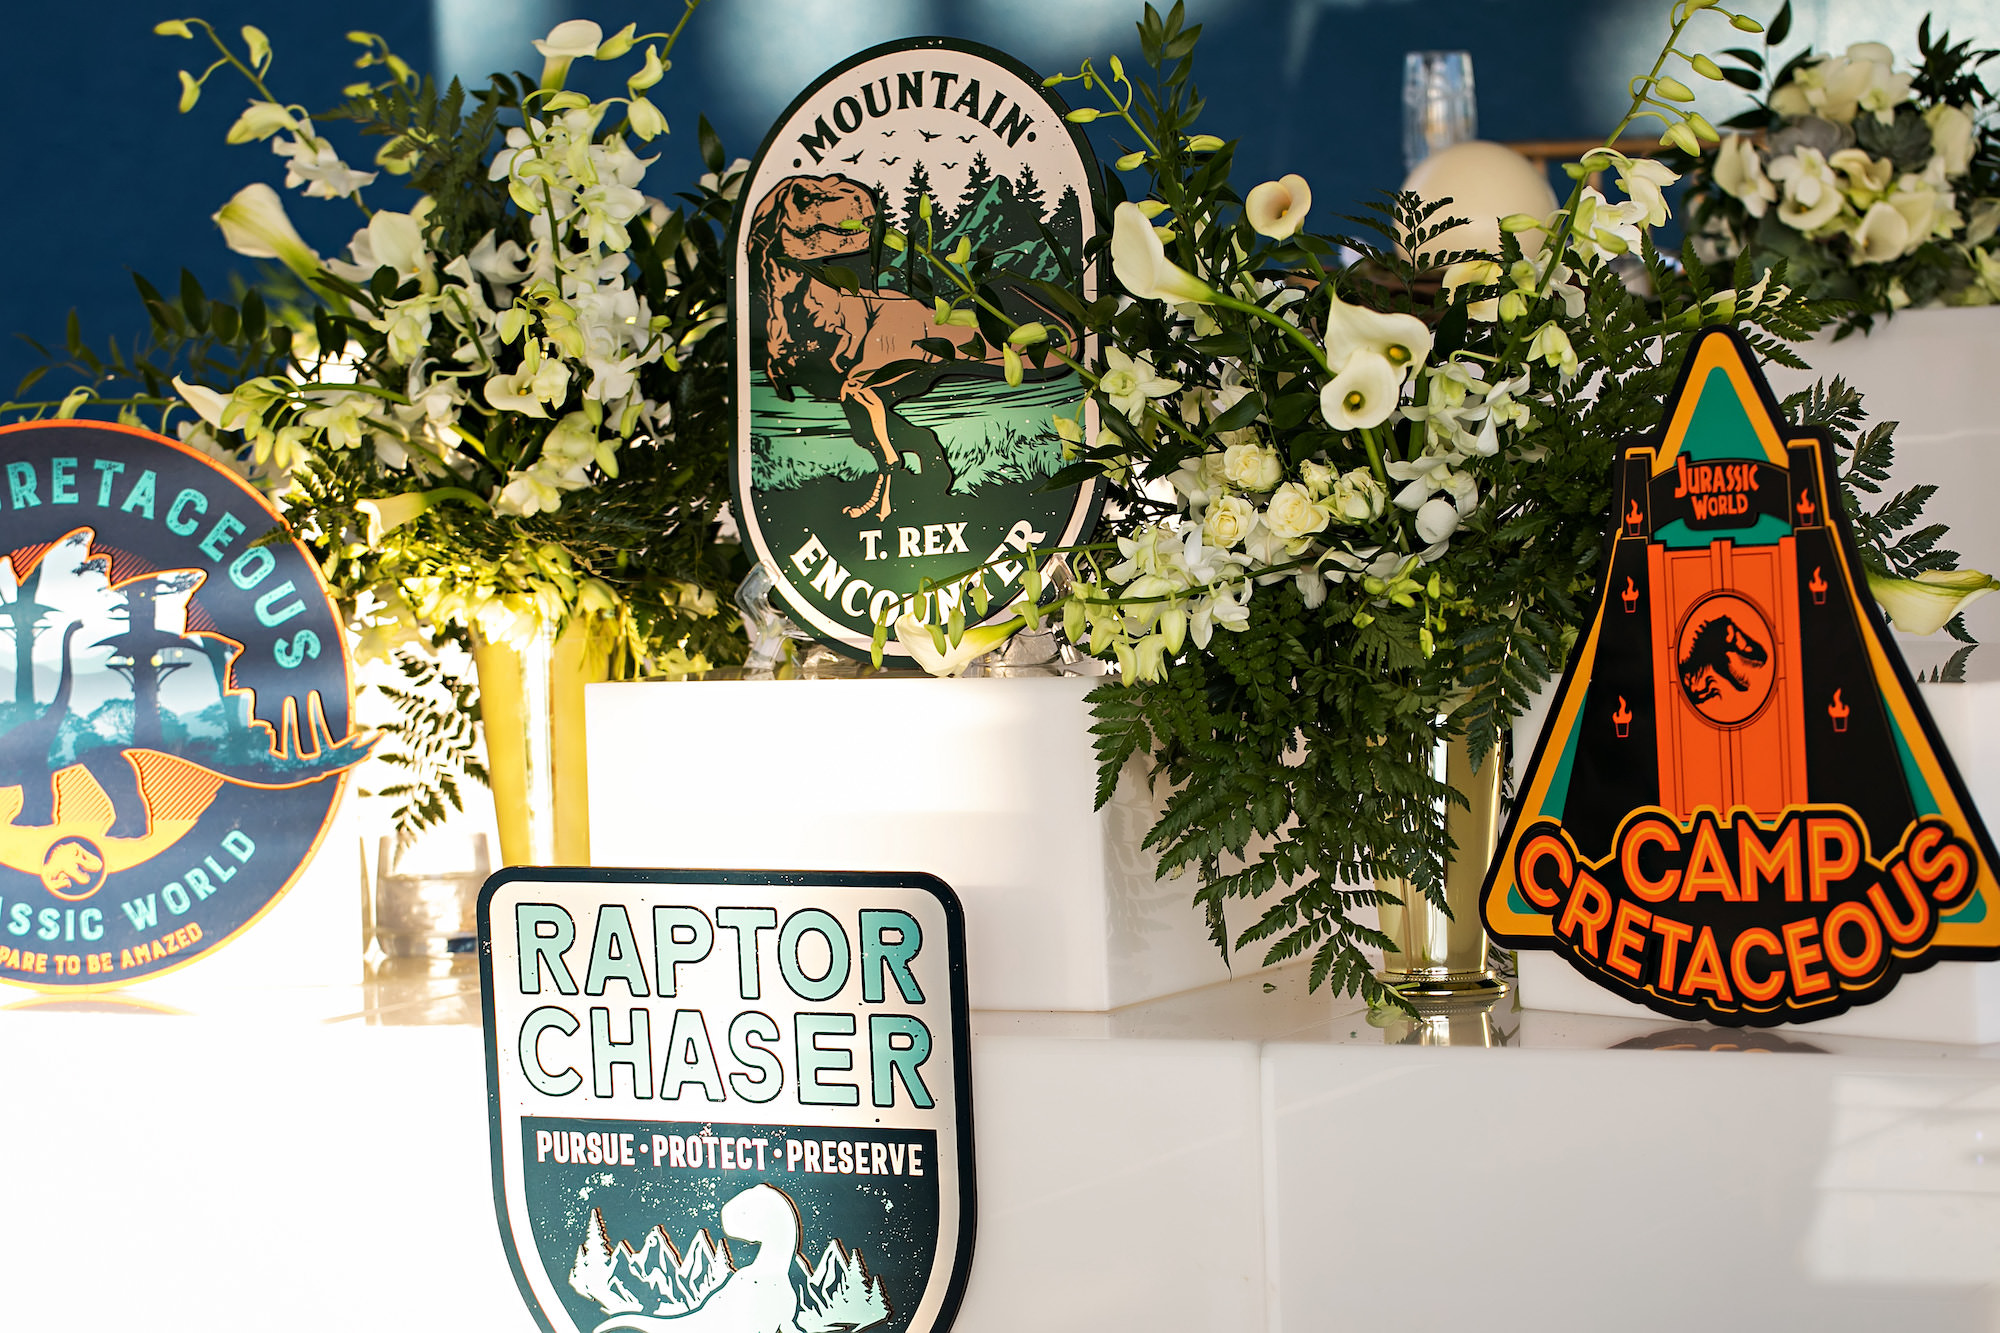 Dinosaur Themed Wedding Décor with White Florals and Greenery | Tampa Florist Bride N Bloom Wholesale and Design